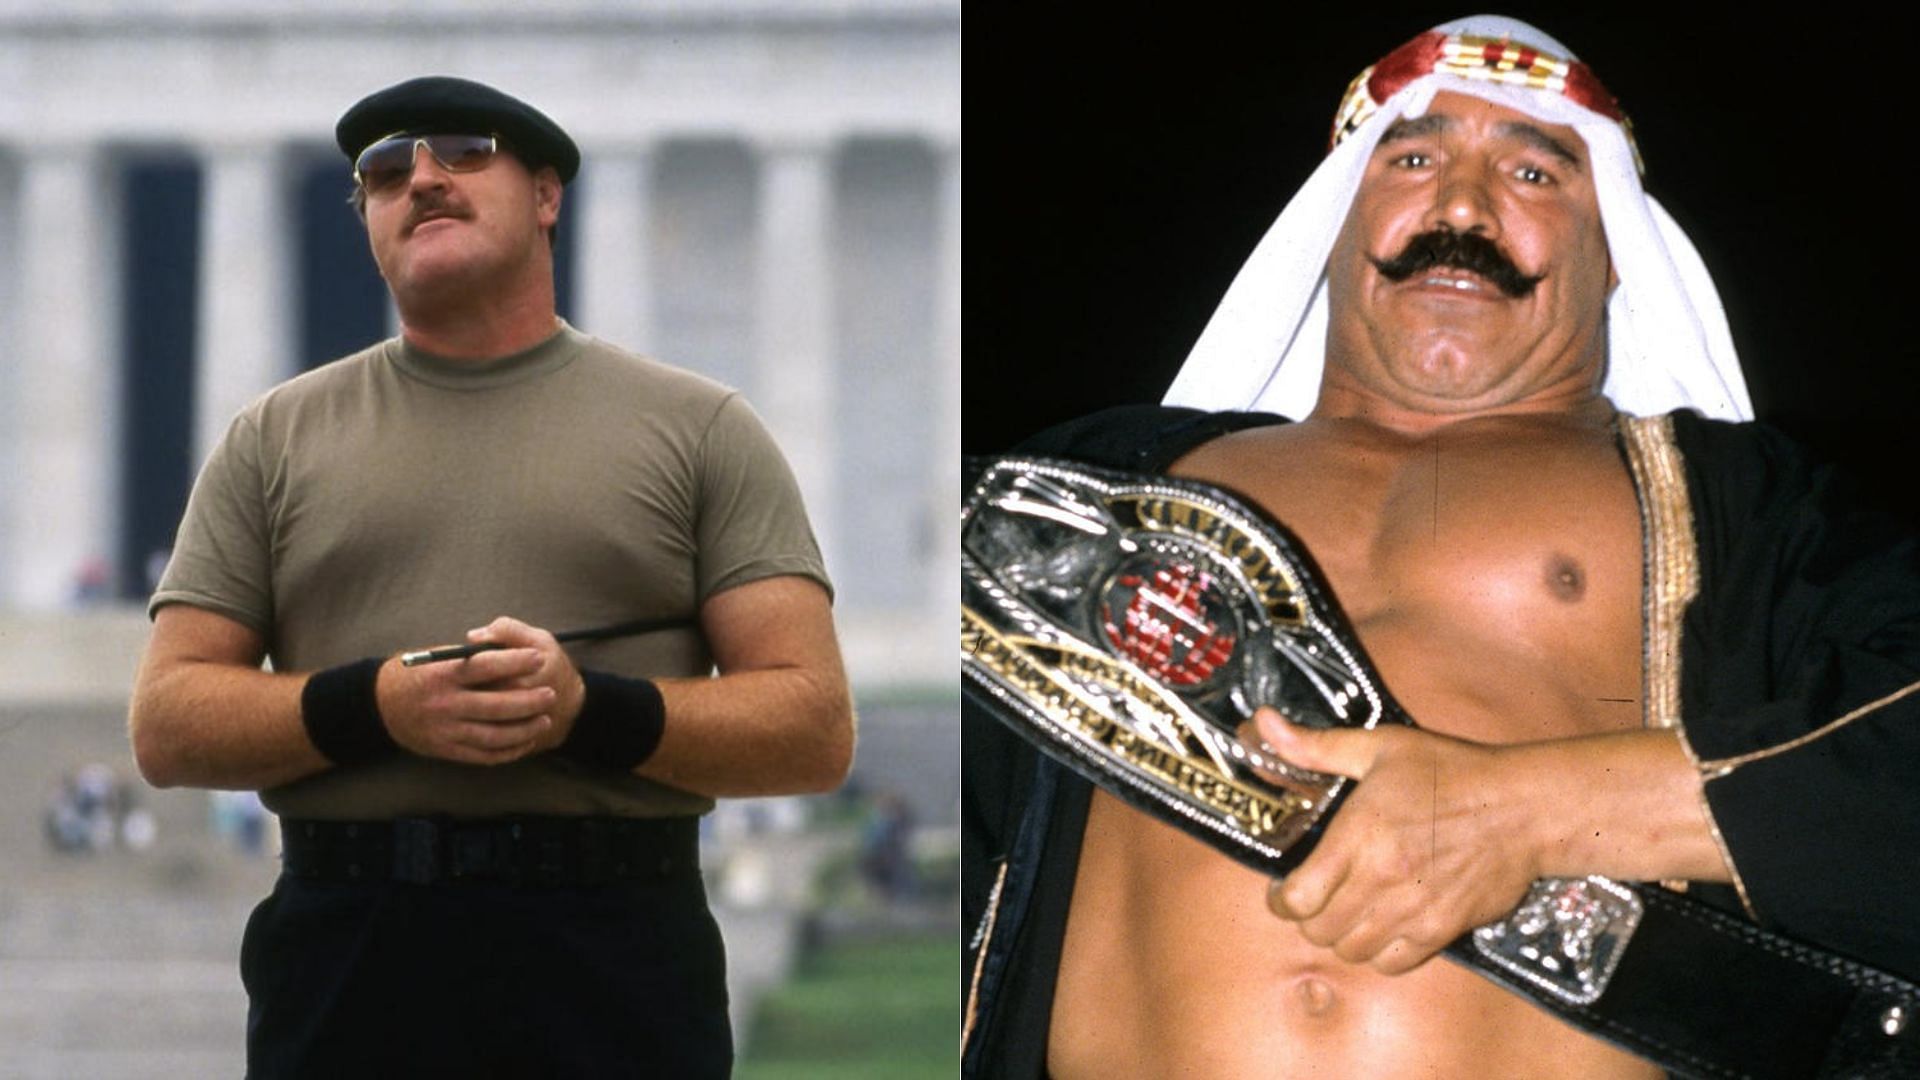 Sgt. Slaughter (left); The Iron Sheik (right)